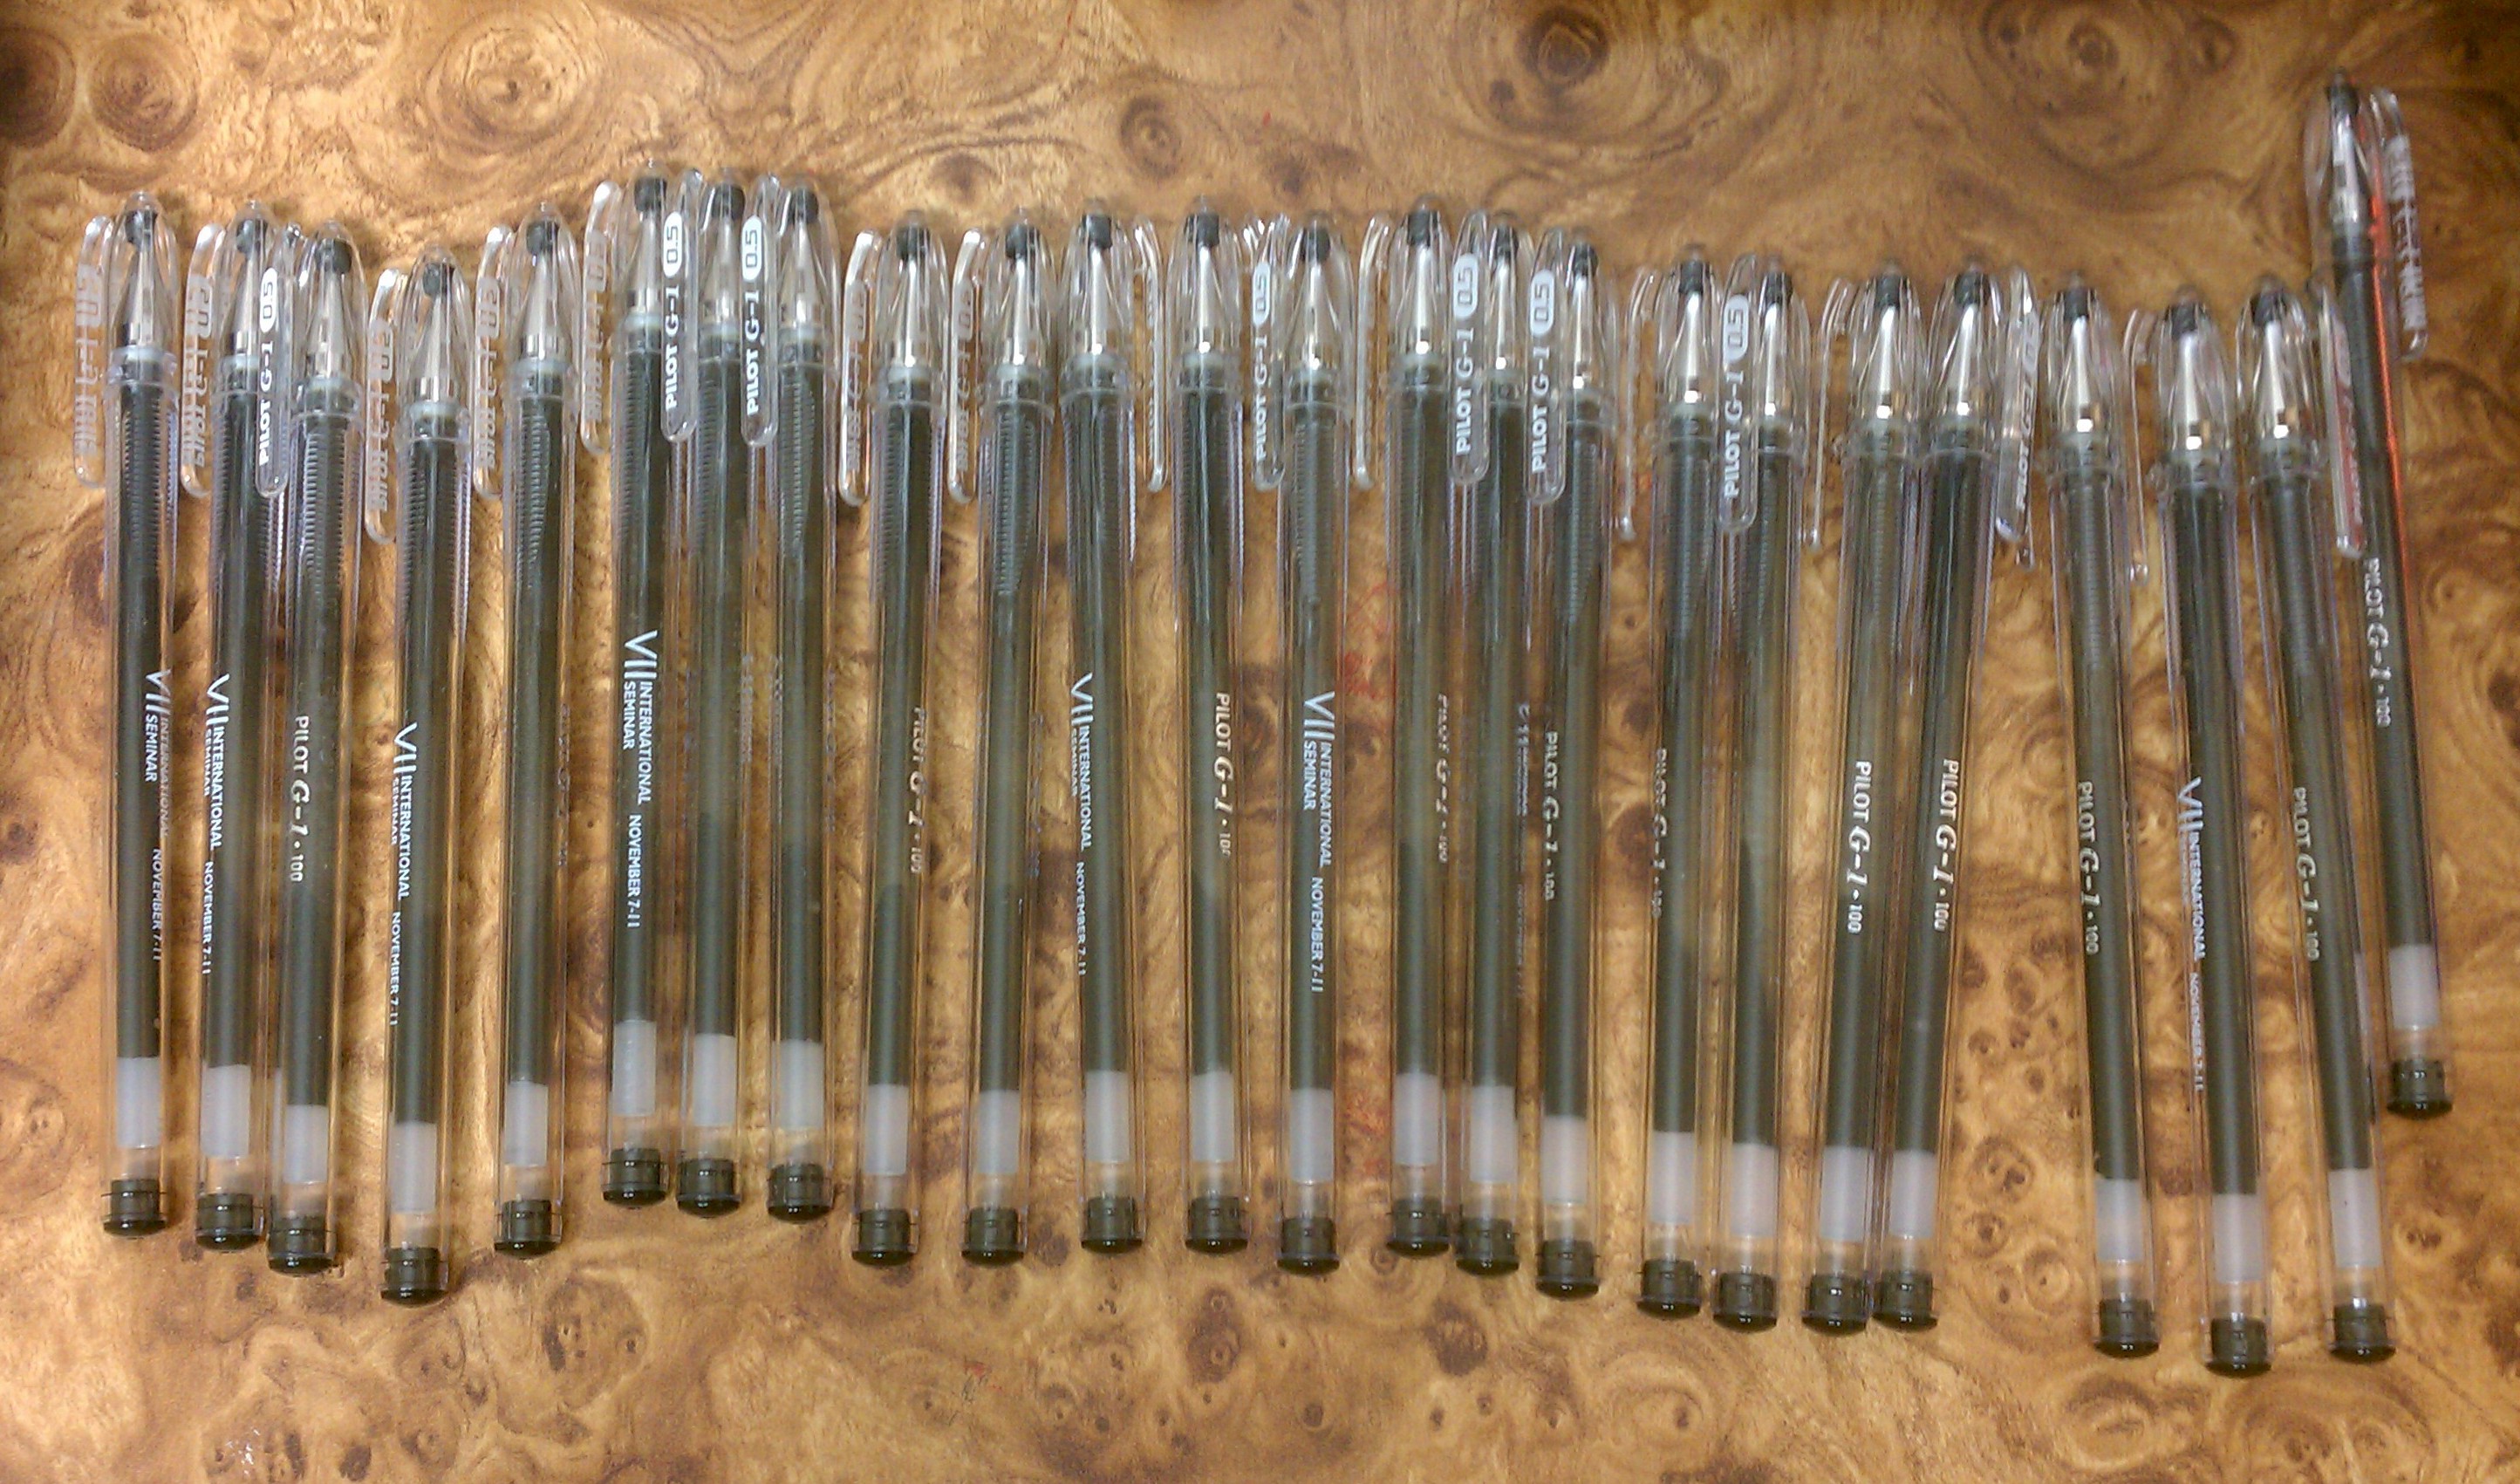 Pens seized by State Police & ICE agents